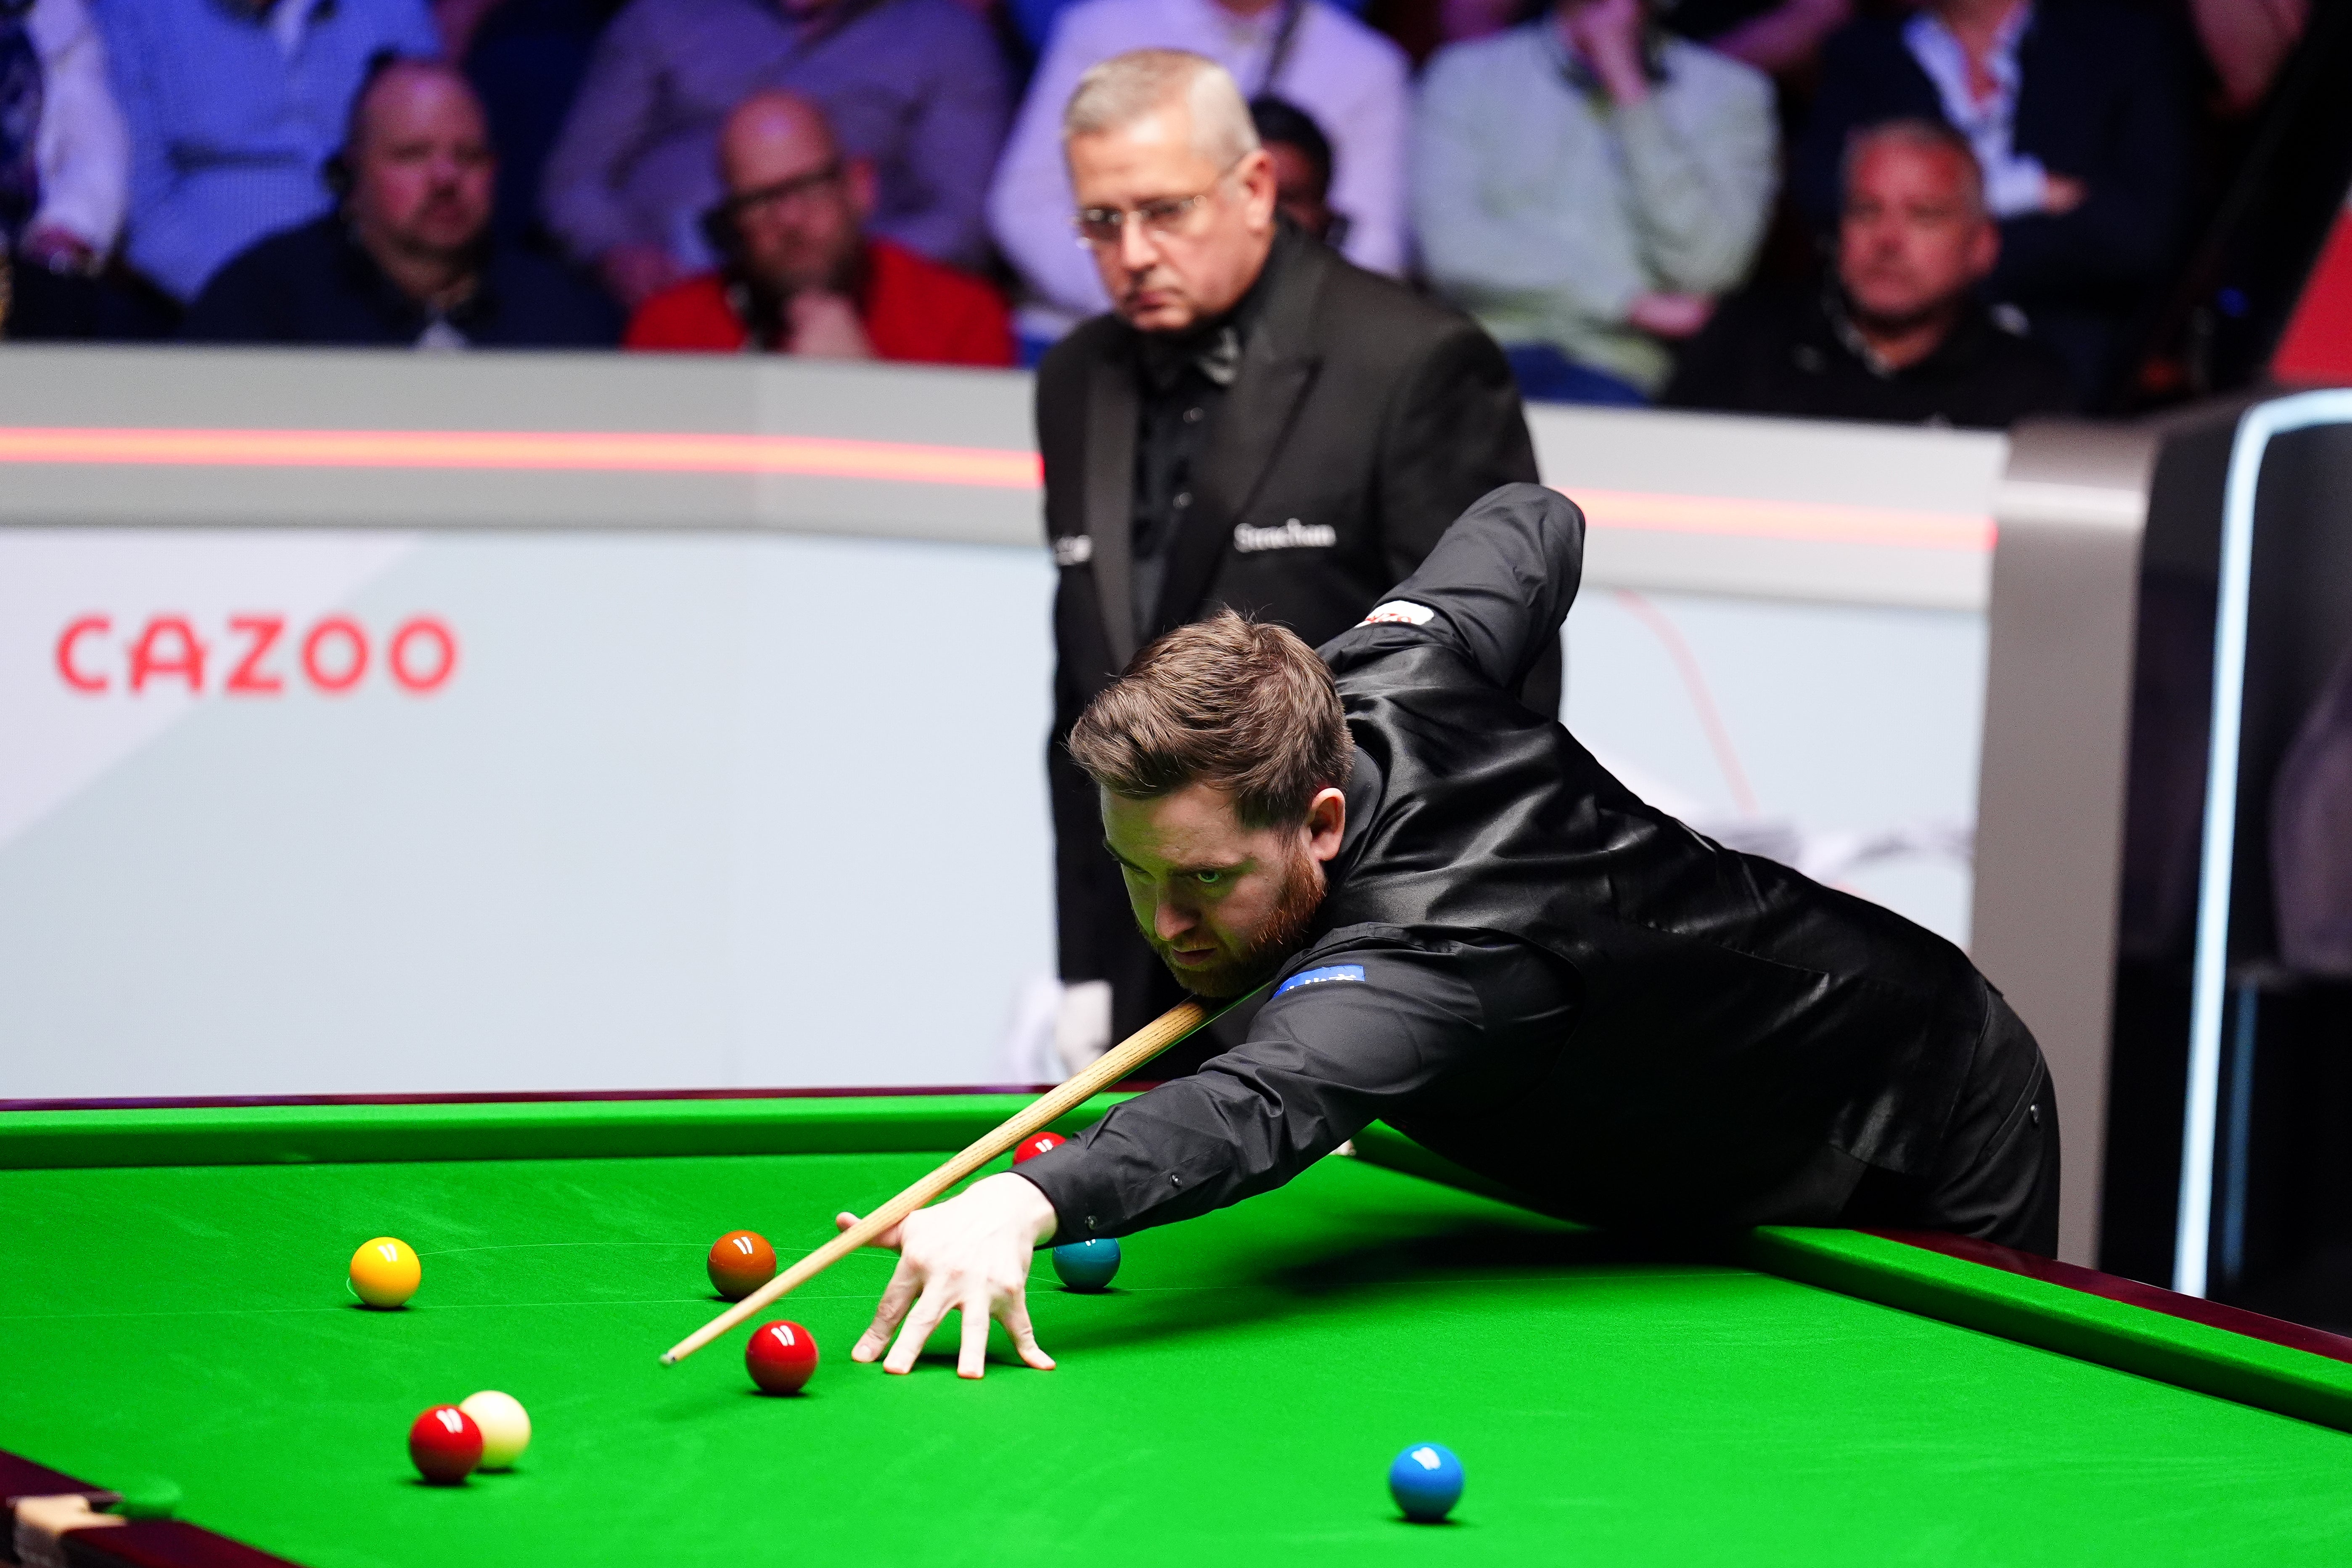 Jak Jones bridges over a red to the cue ball